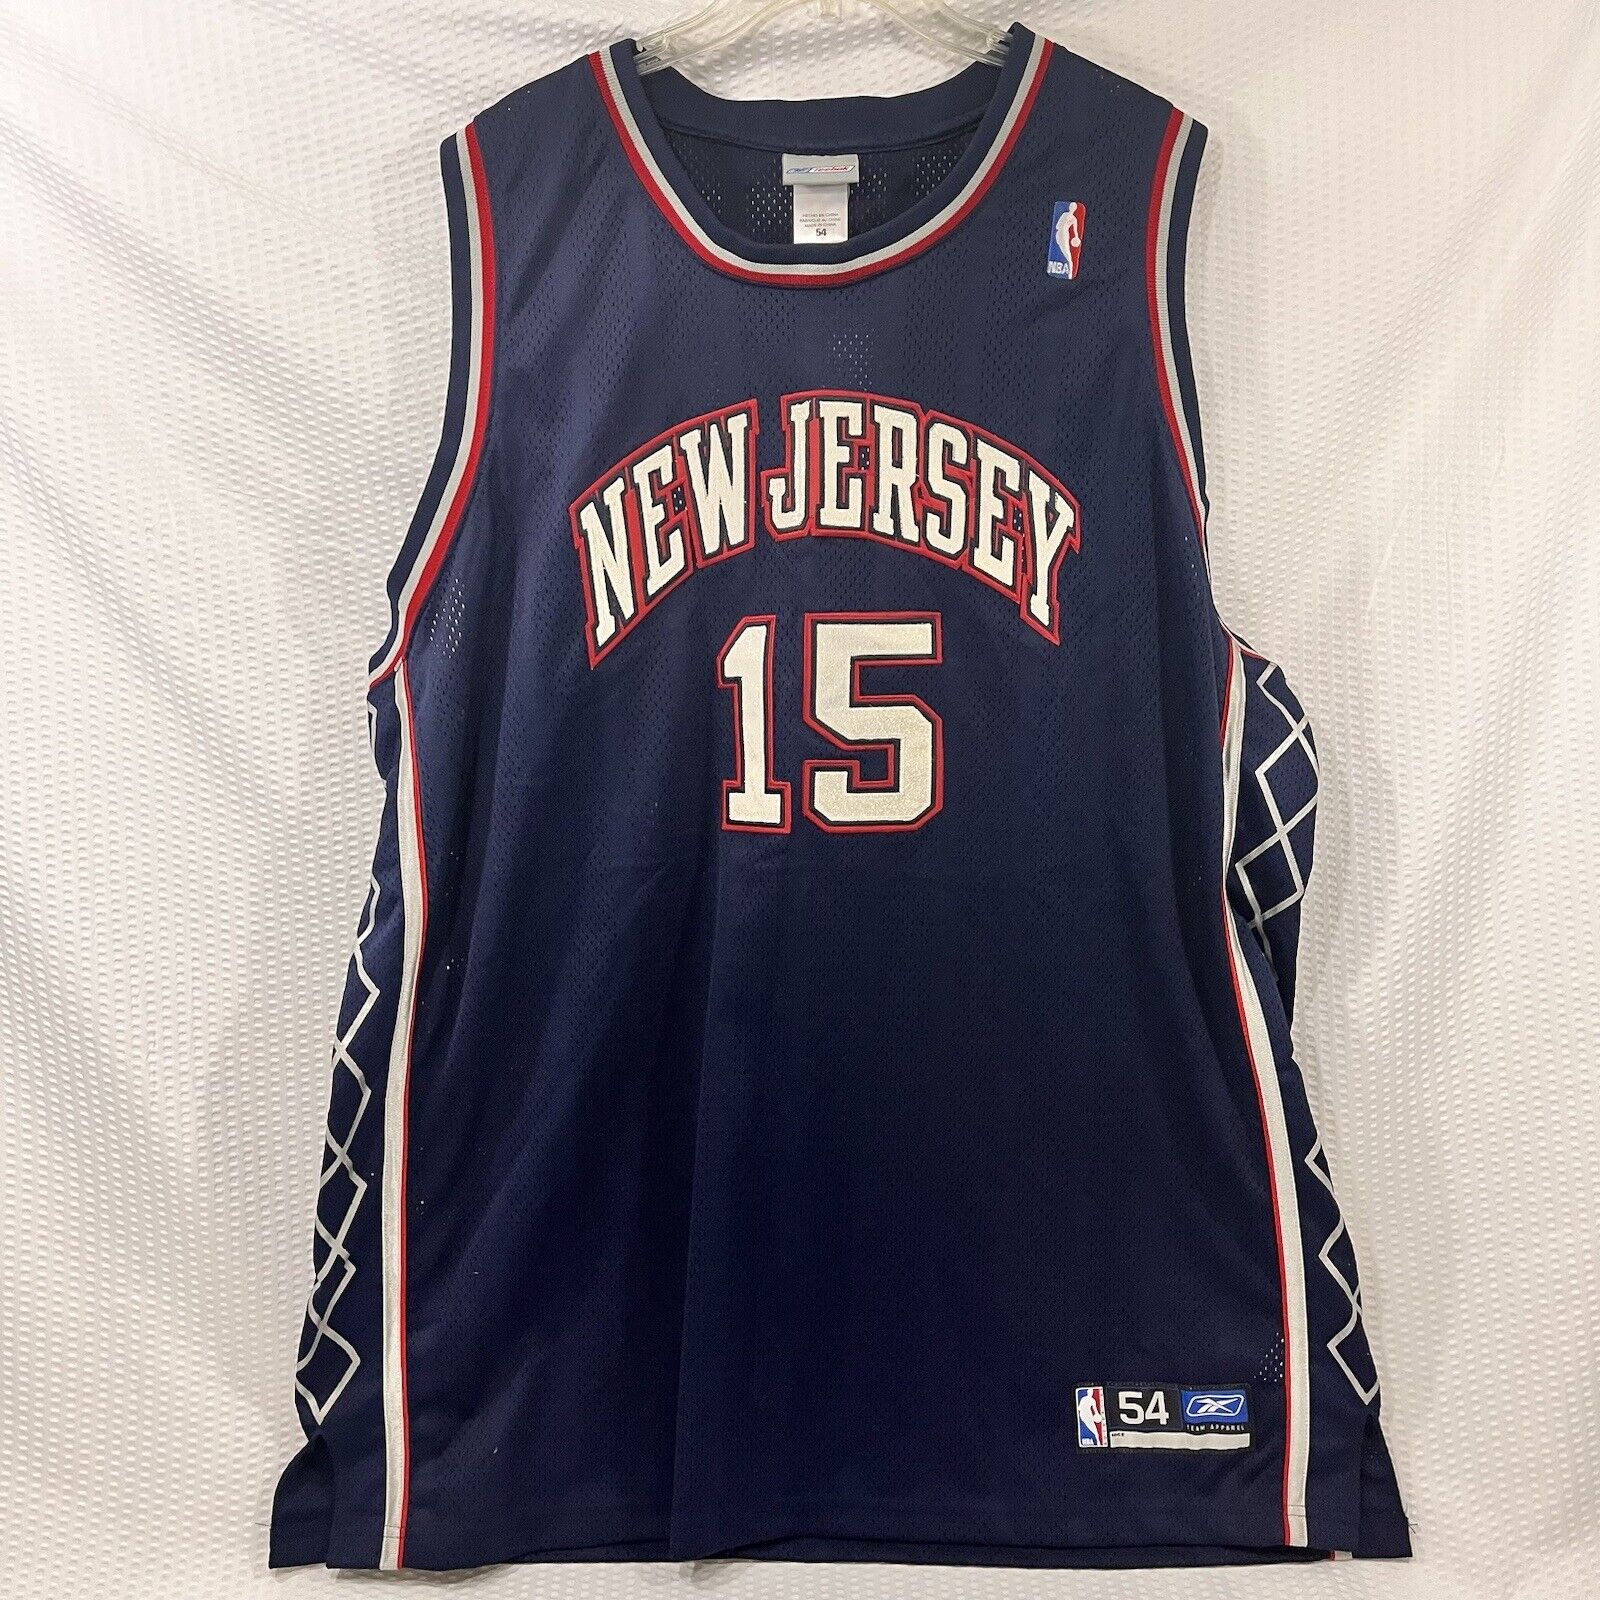 Authentic Vince Carter New Jersey Nets NBA Jersey Size 54 Reebok New With Tags